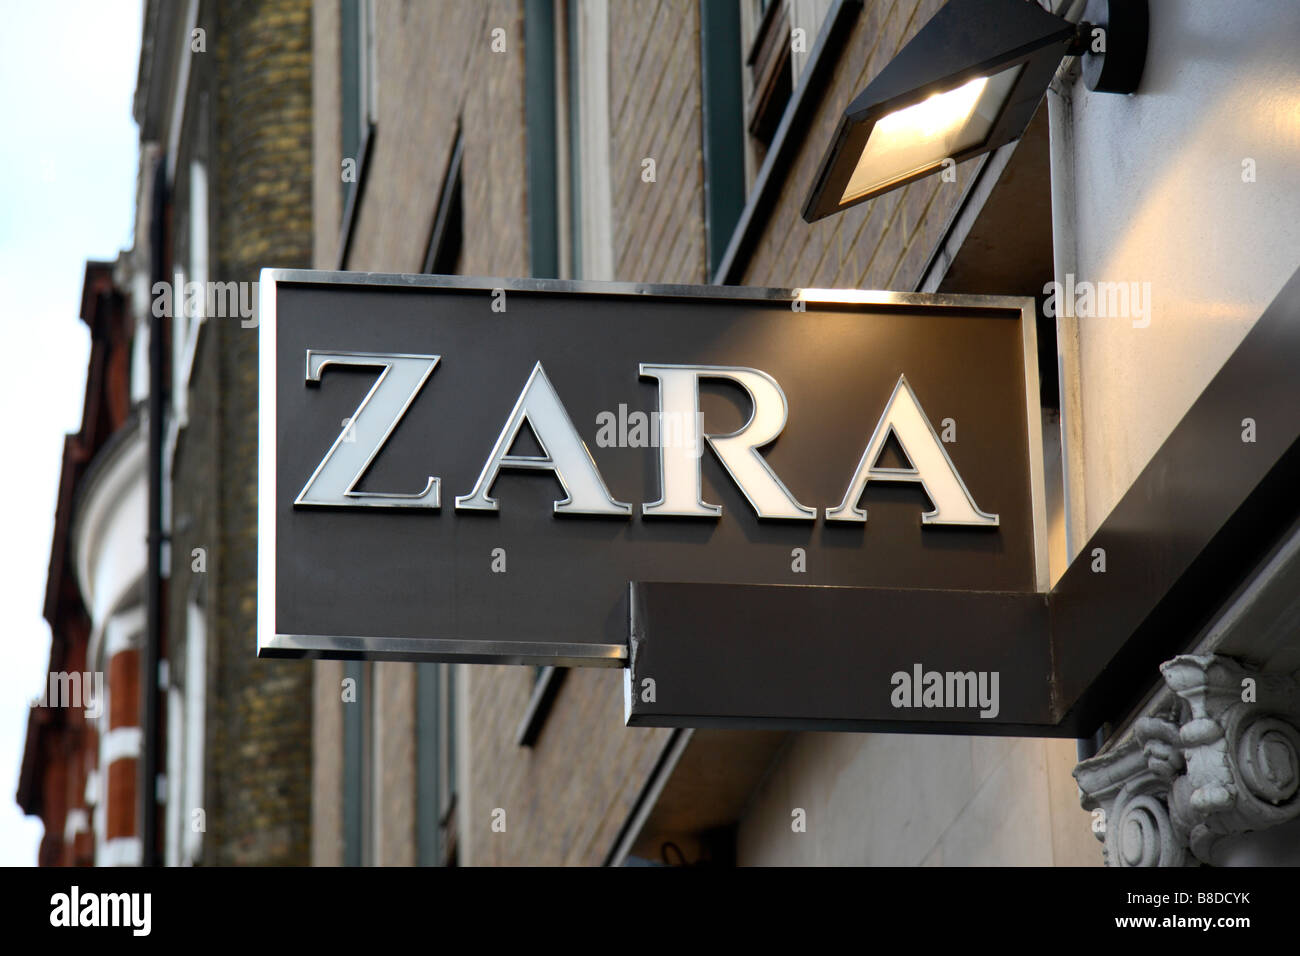 A sign outside the Zara clothing shop, Covent Garden, London. Jan 2009  Stock Photo - Alamy